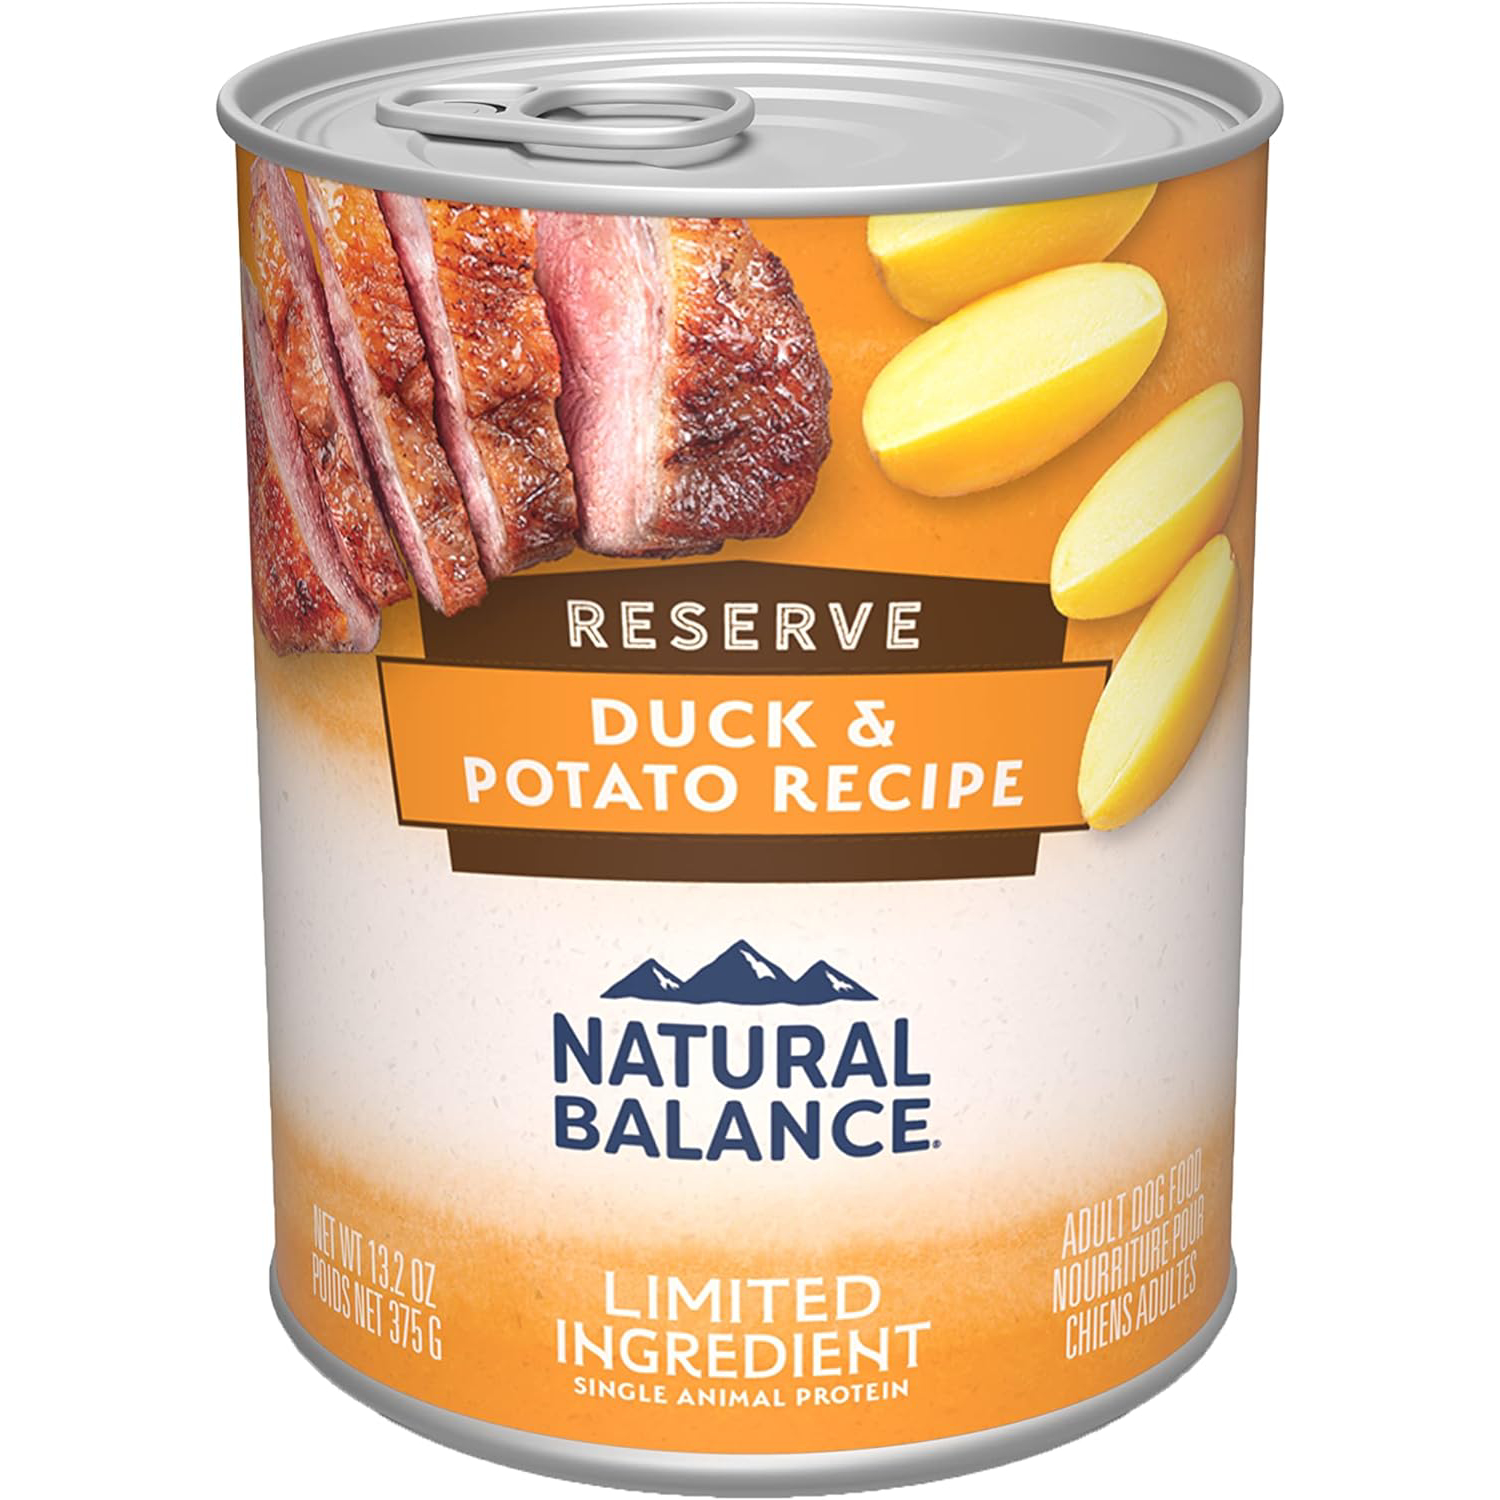 Natural Balance Limited Ingredient Adult Grain-Free Wet Canned Dog Food